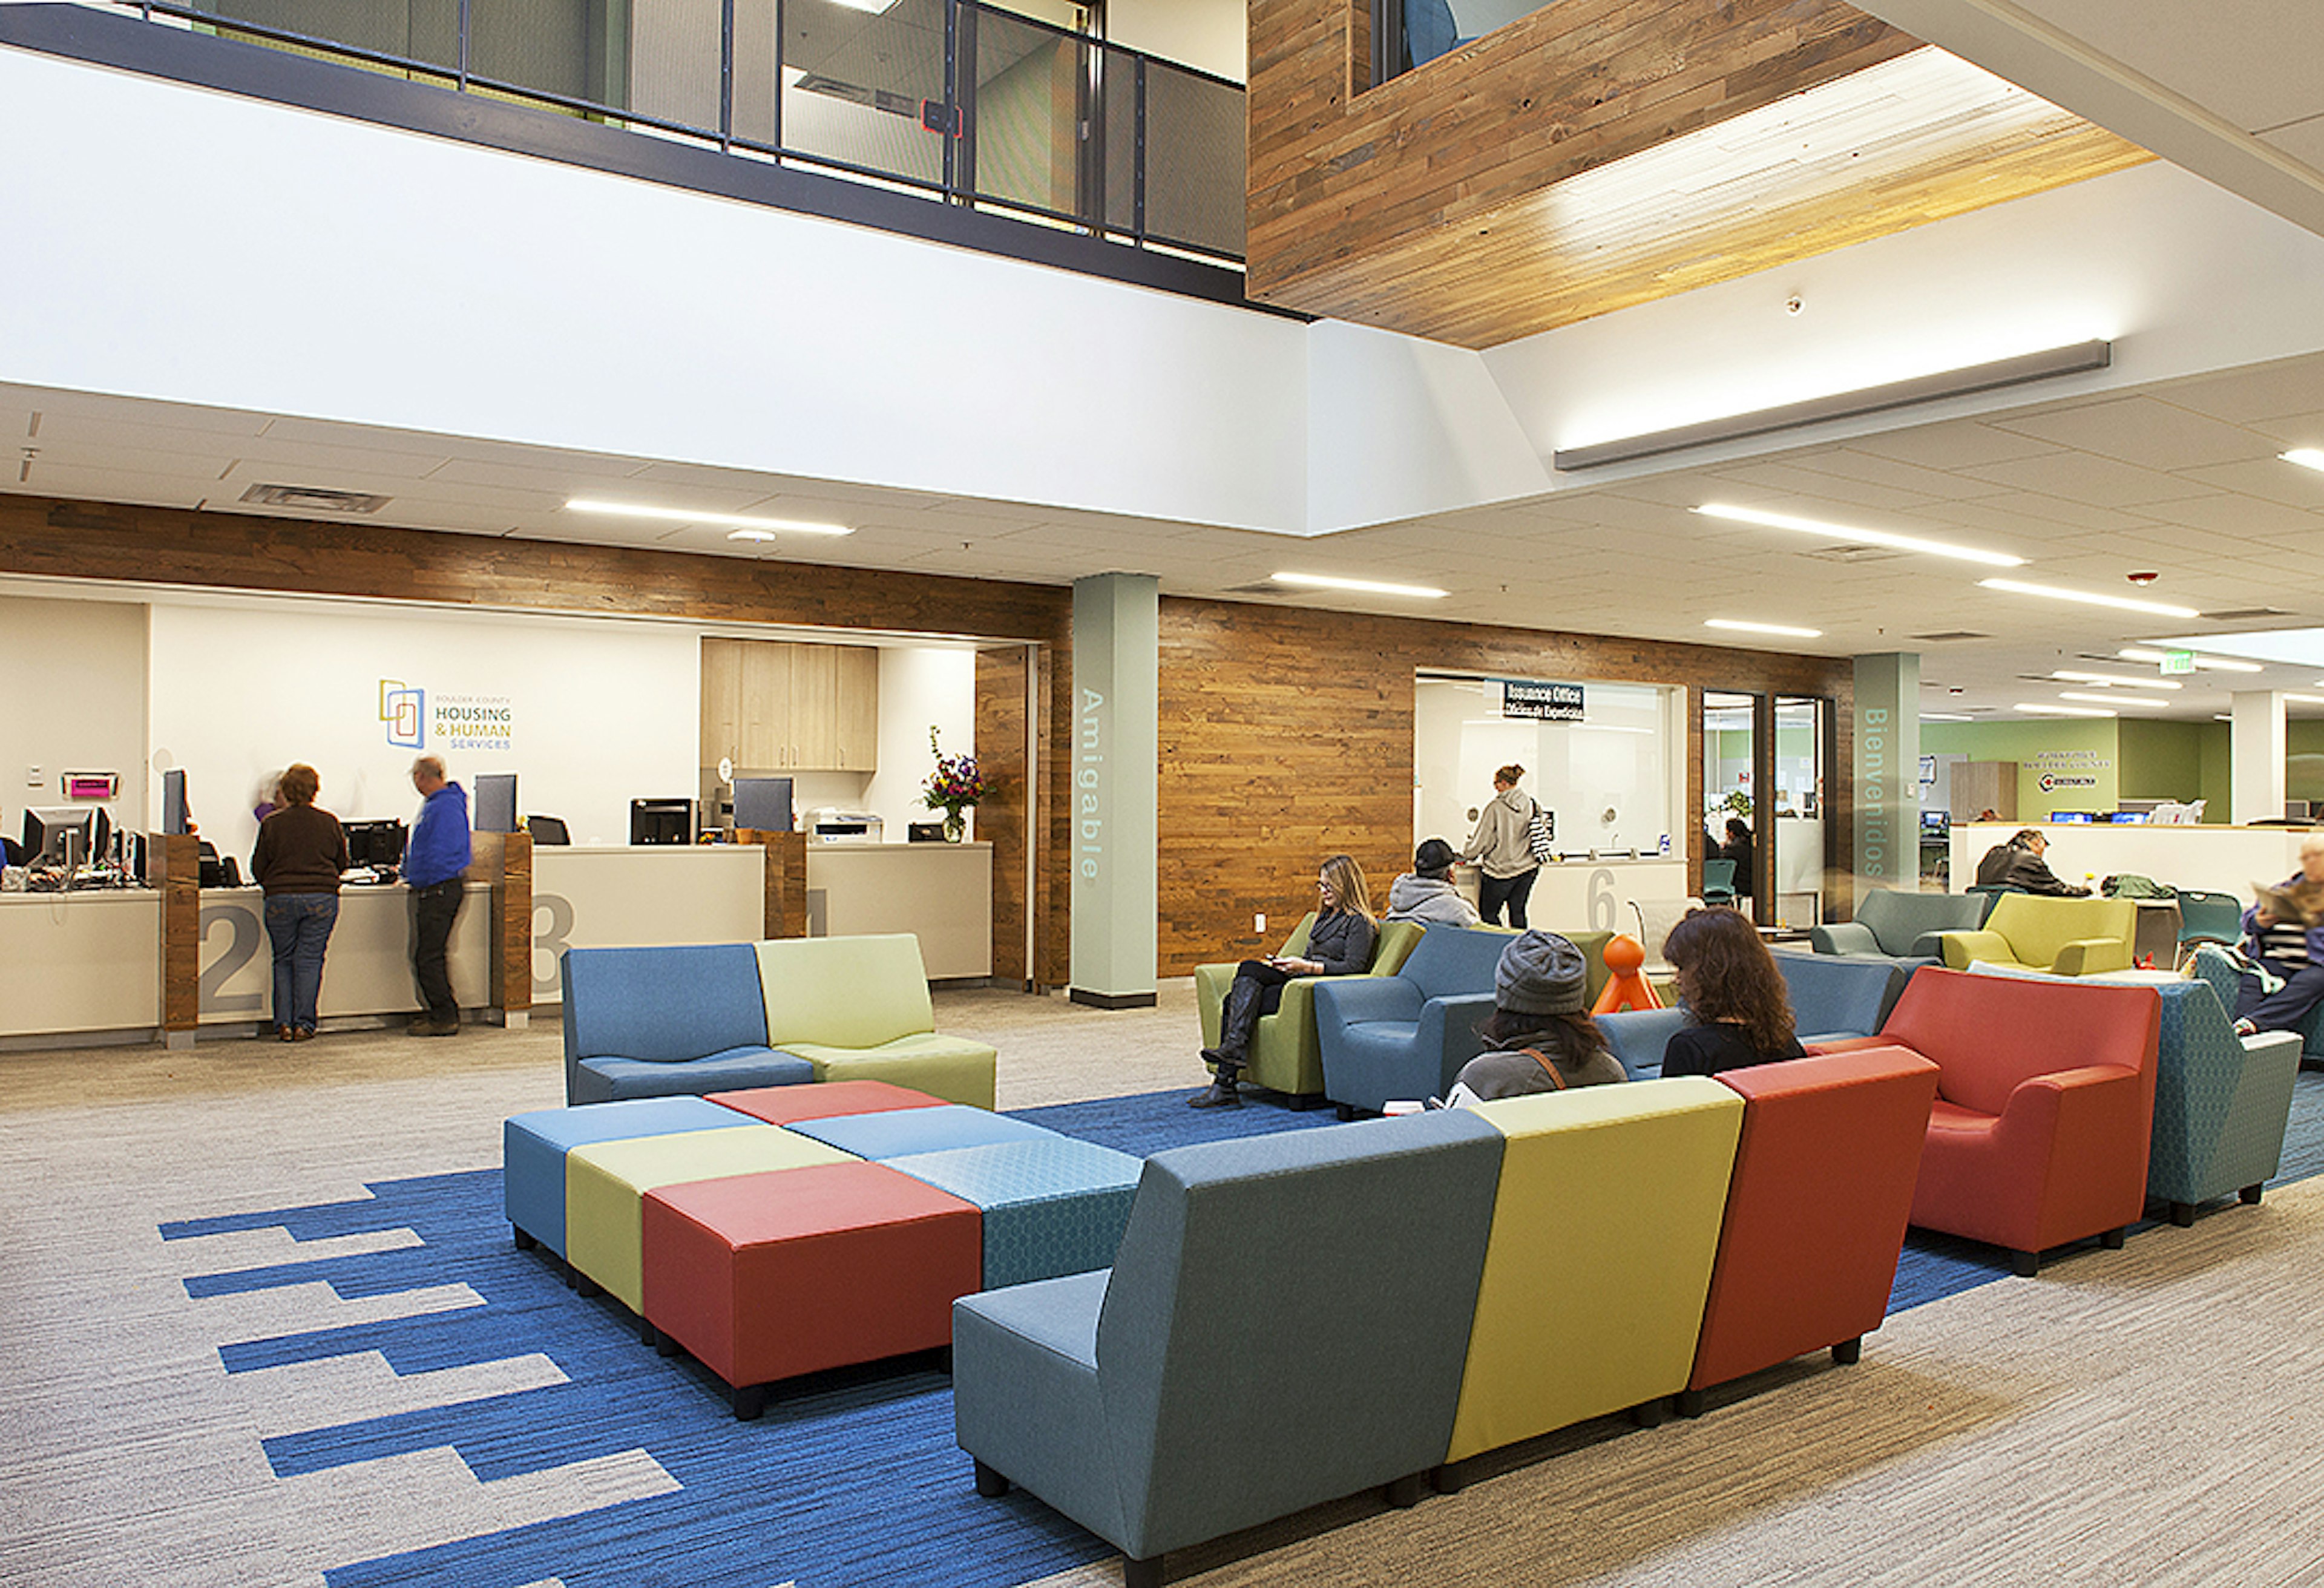 First floor of Coffman building. Front desk and bright chairs.